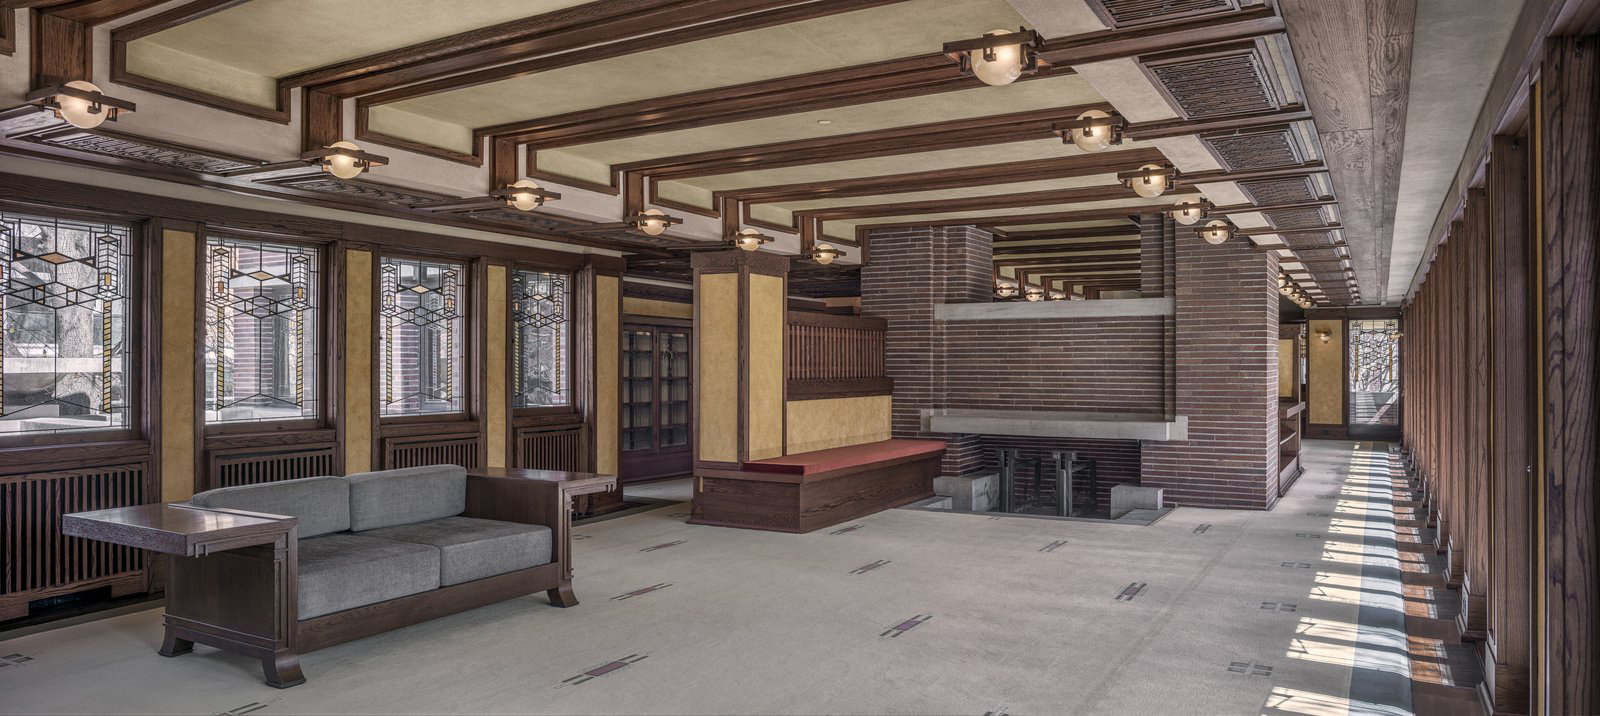 Frank Lloyd Wright’s Robie house has reopened to the public